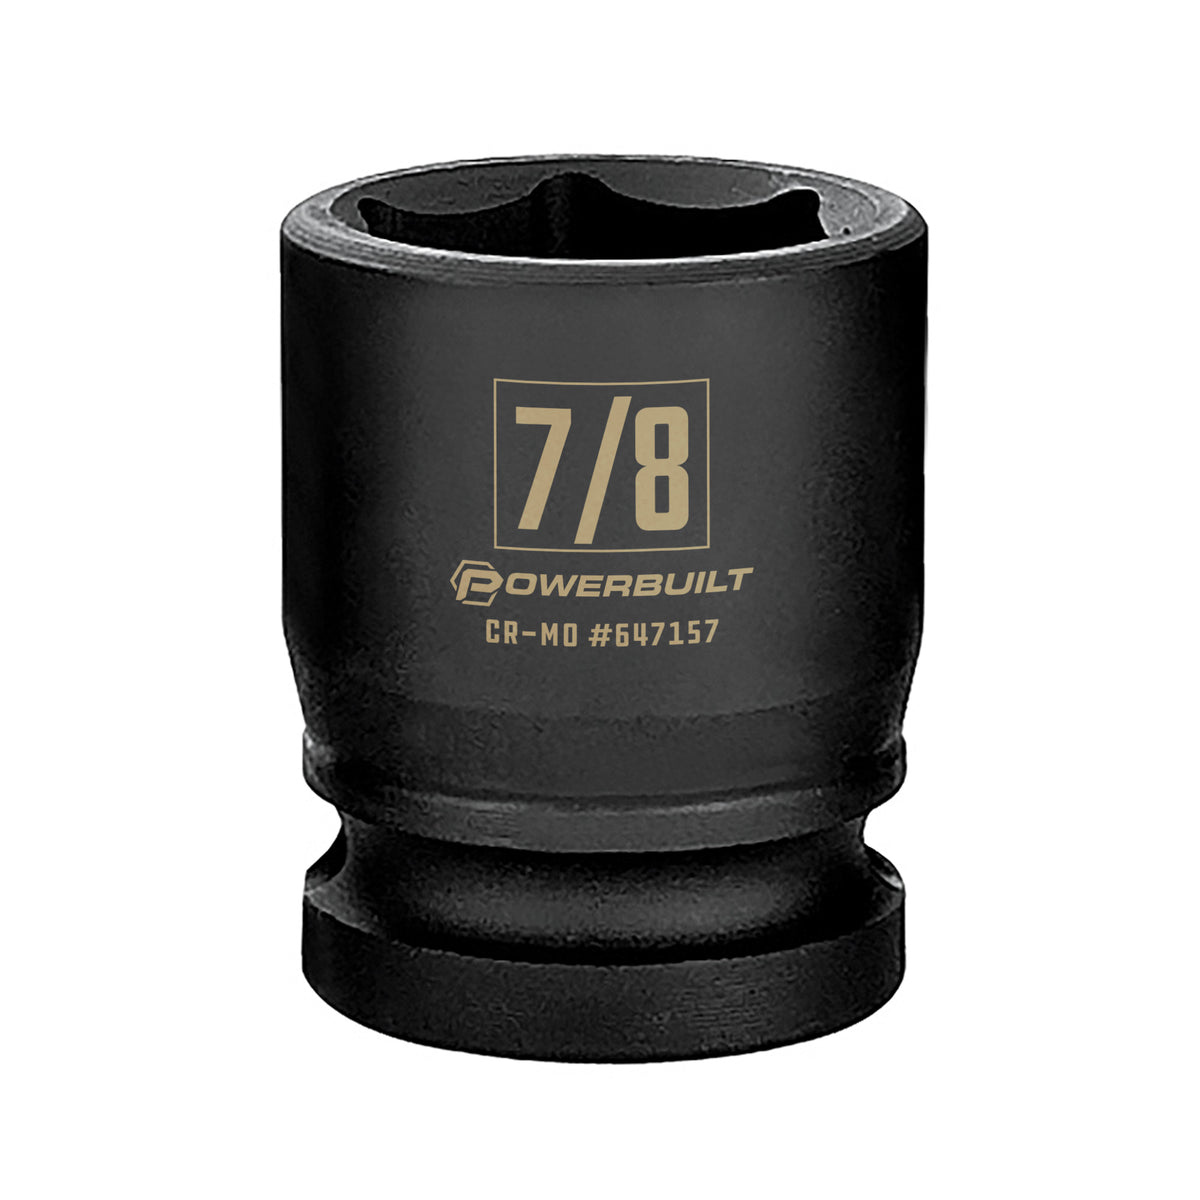 1/2 Inch Drive x 7/8 Inch 6 Point Impact Socket